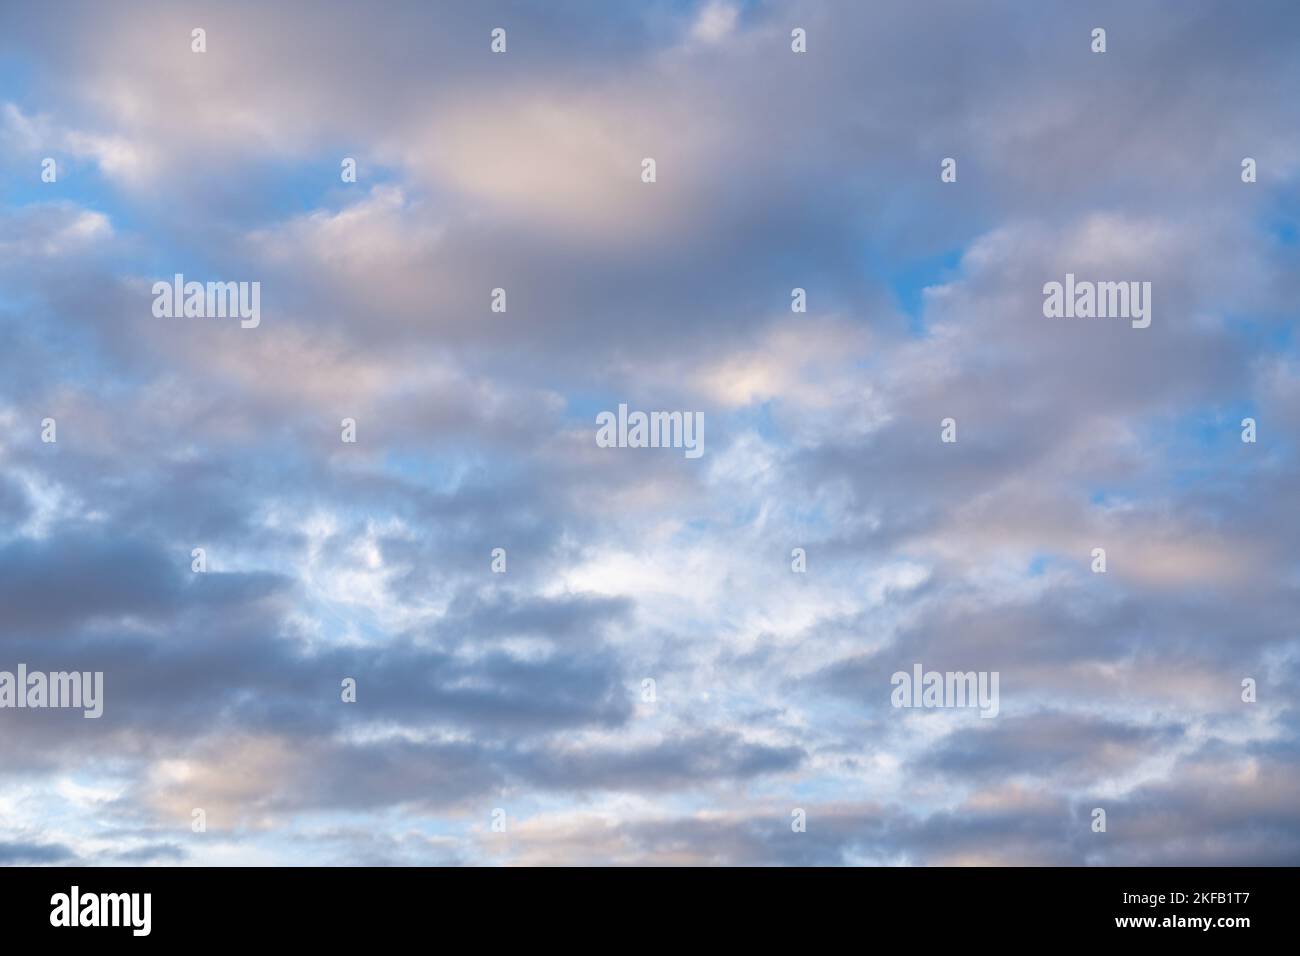 Beautiful sunset or sunrise sky, illuminating dark blue and pale pink clouds. Cloudy sky to overlay on your photos. Stock Photo